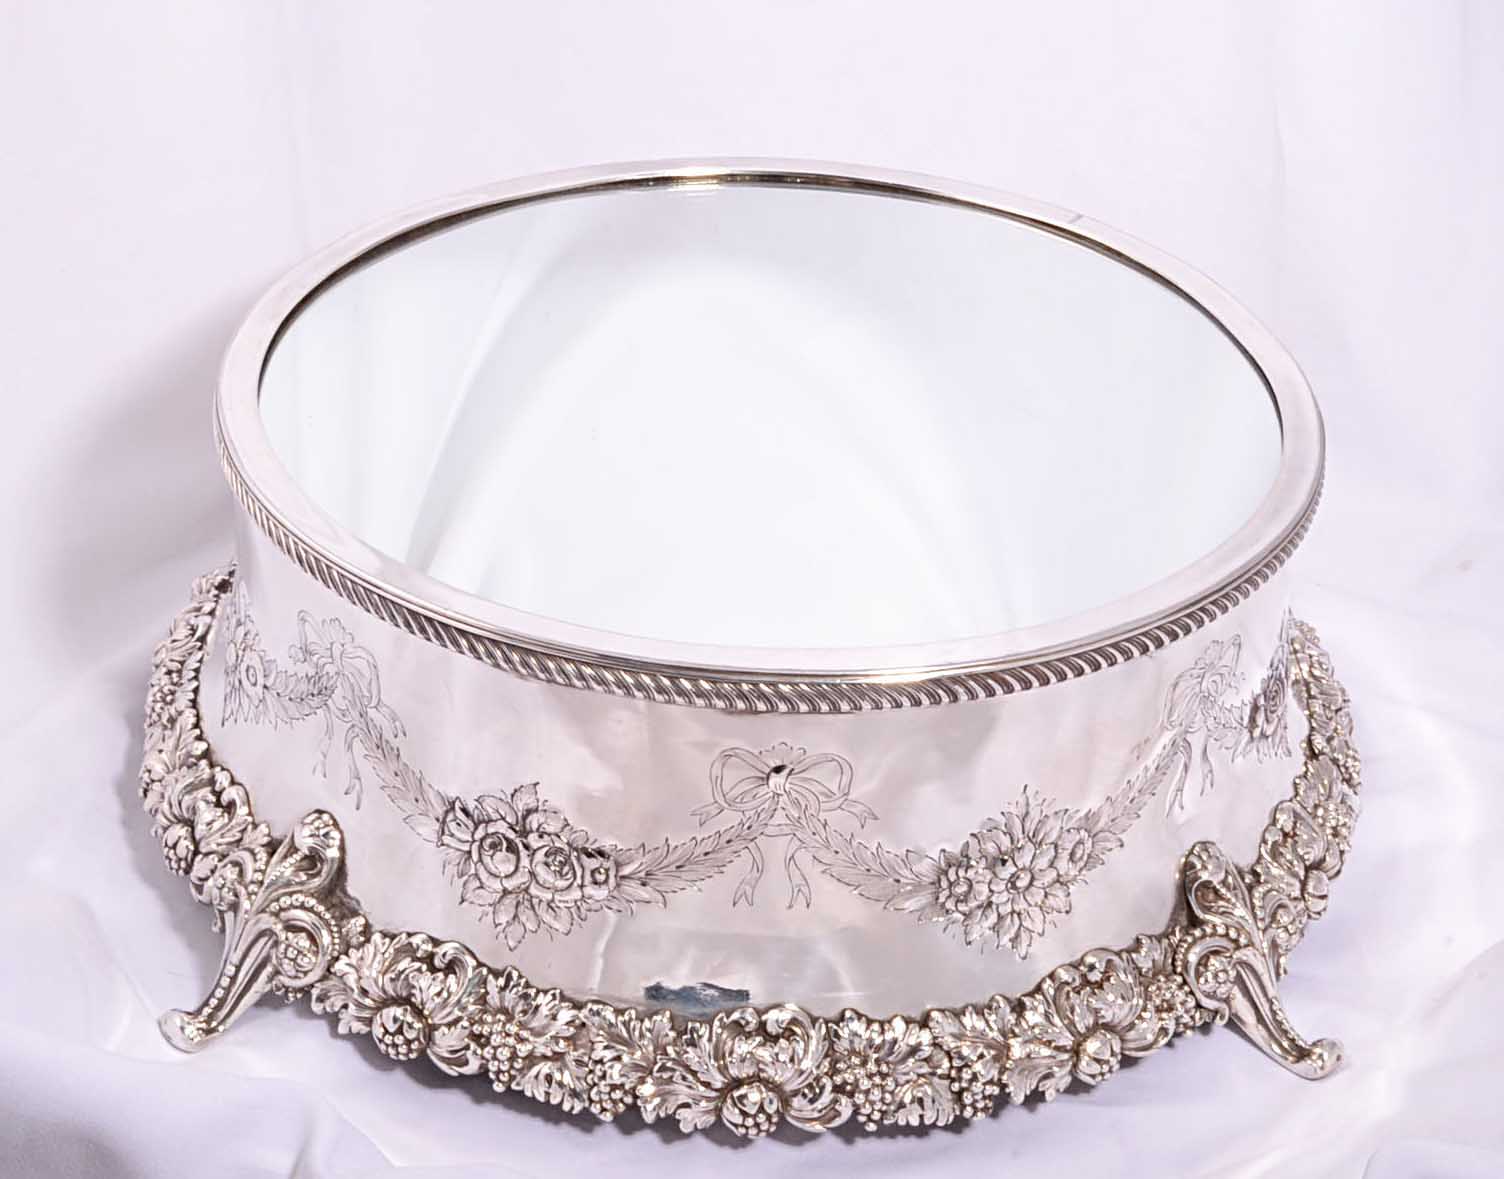 03755 Antique English Silver Plated Cake Stand C1860 7 